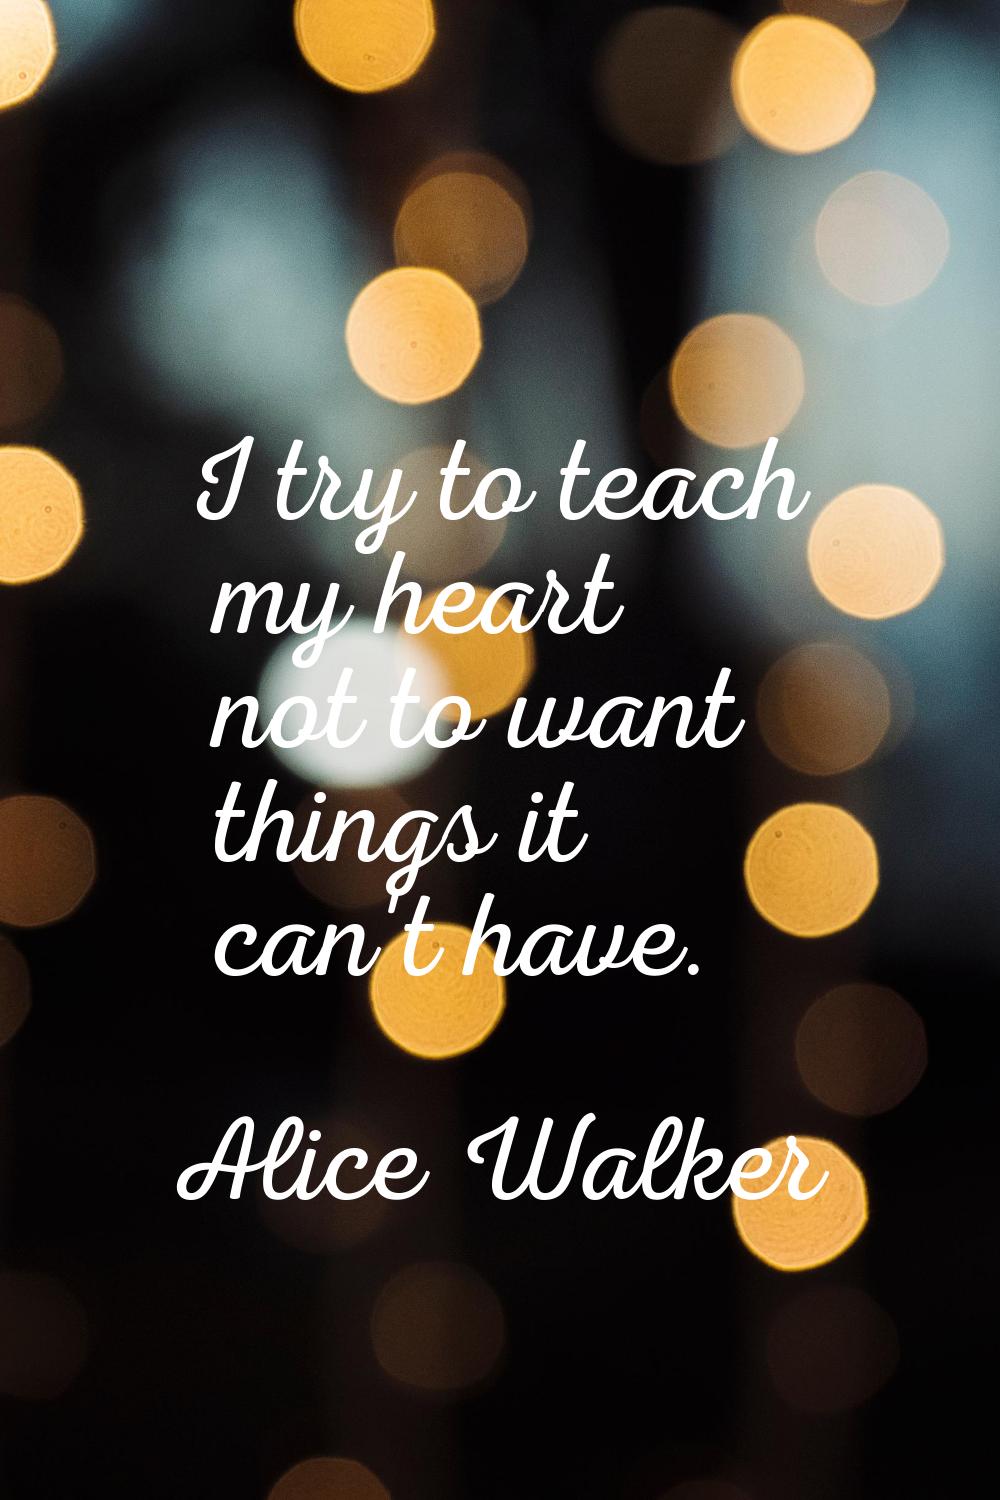 I try to teach my heart not to want things it can't have.